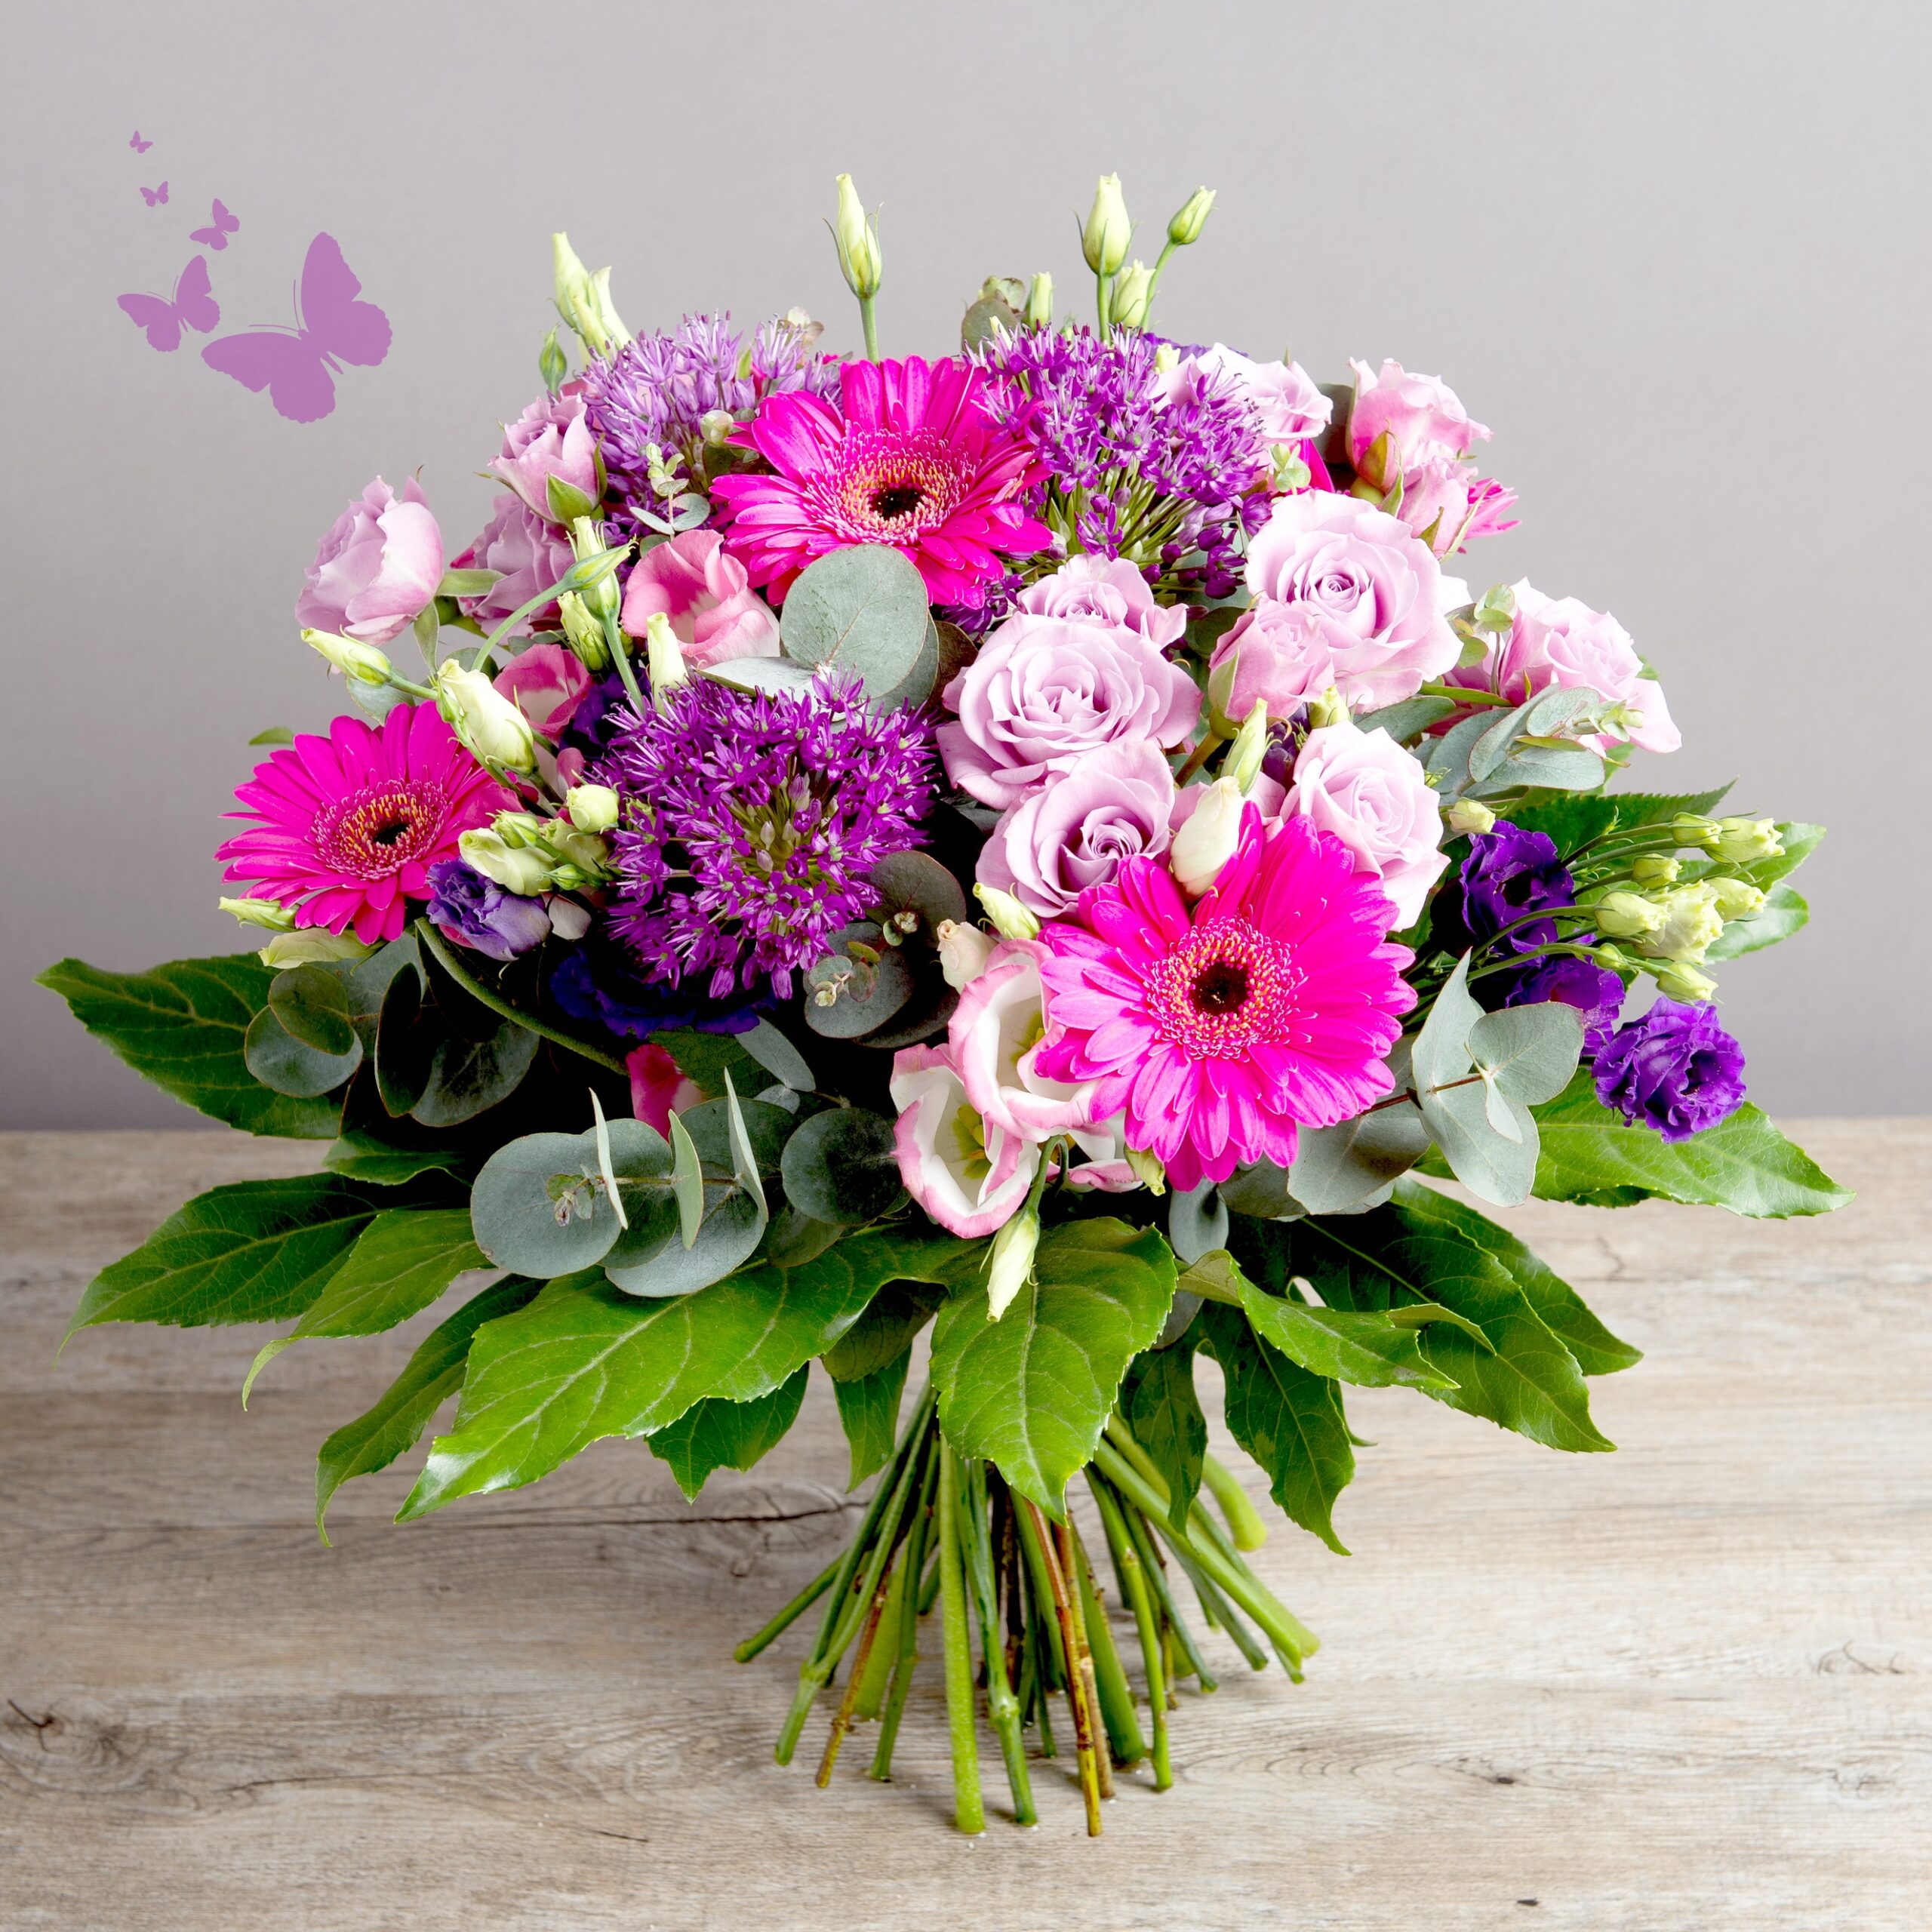 Our Guide on How to Pick Birthday Flowers